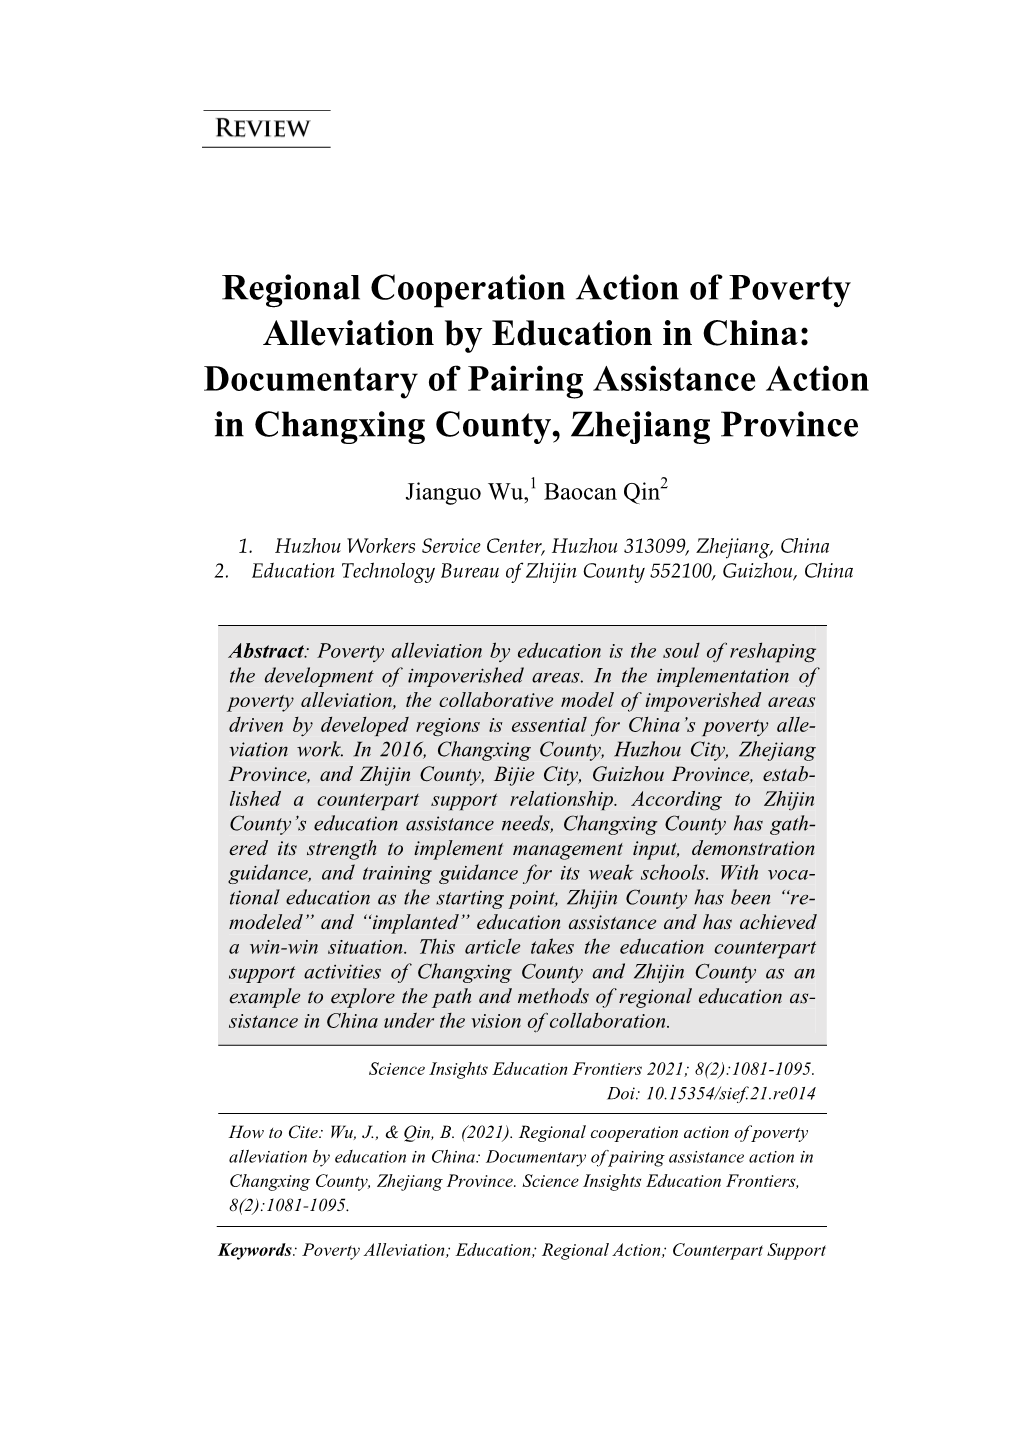 Regional Cooperation Action of Poverty Alleviation by Education in China: Documentary of Pairing Assistance Action in Changxing County, Zhejiang Province